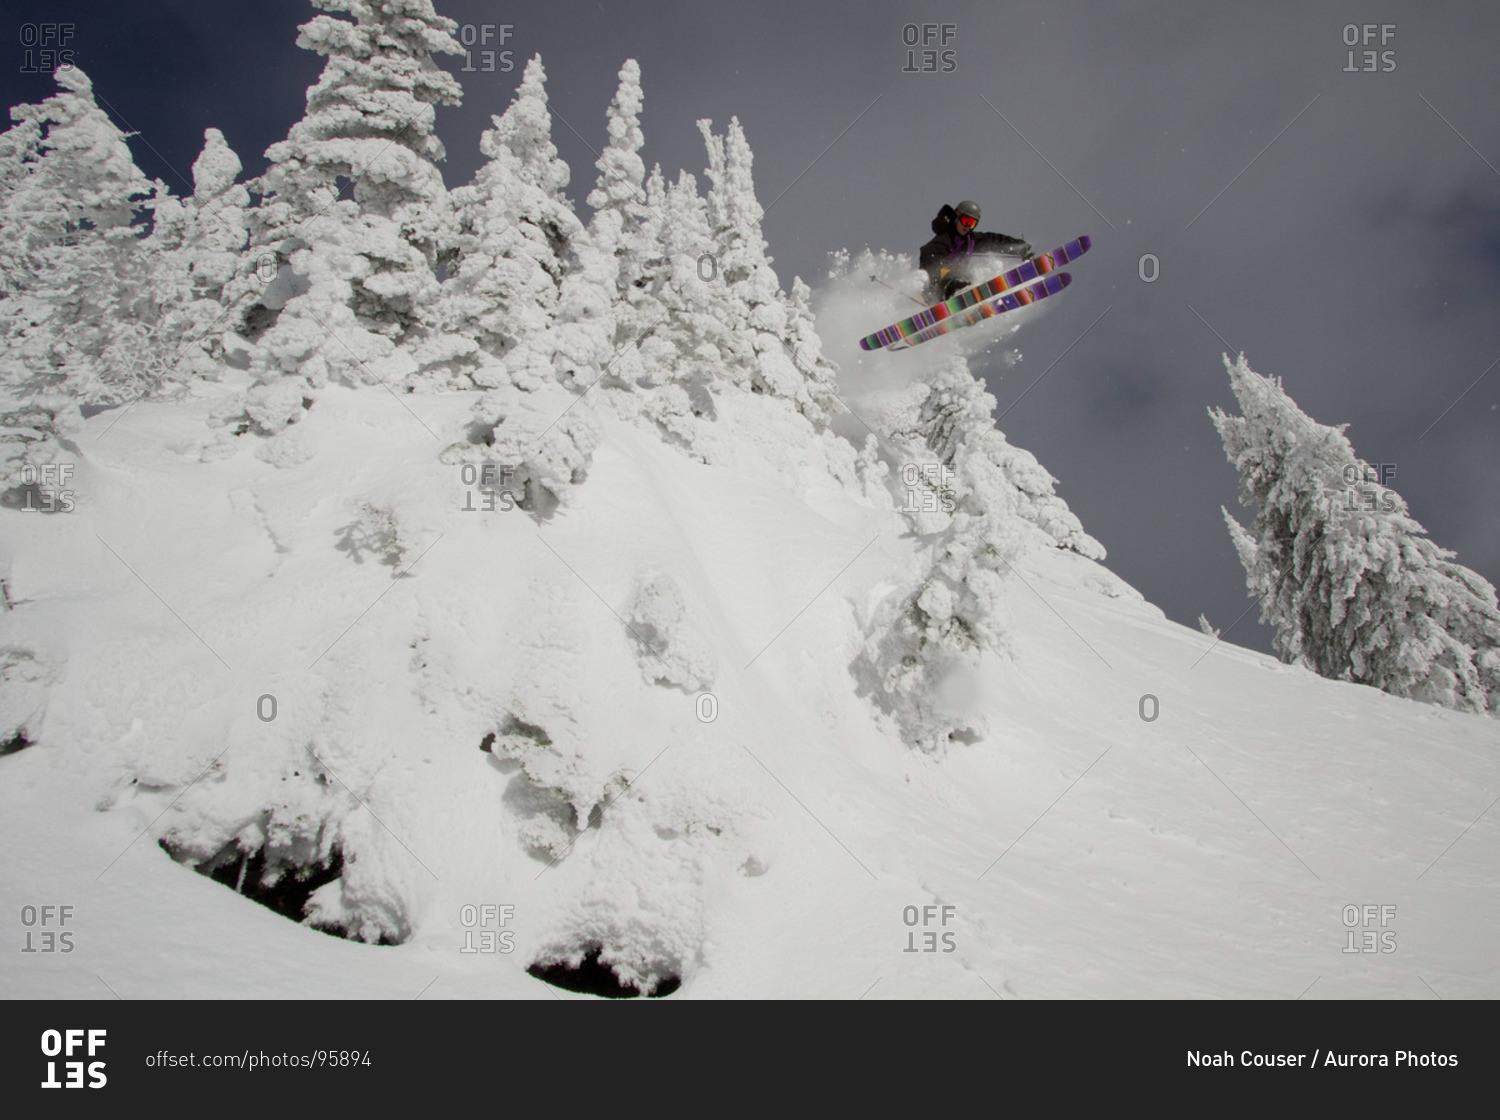 A skier catches air over a little cliff surrounded by snowcovered trees.